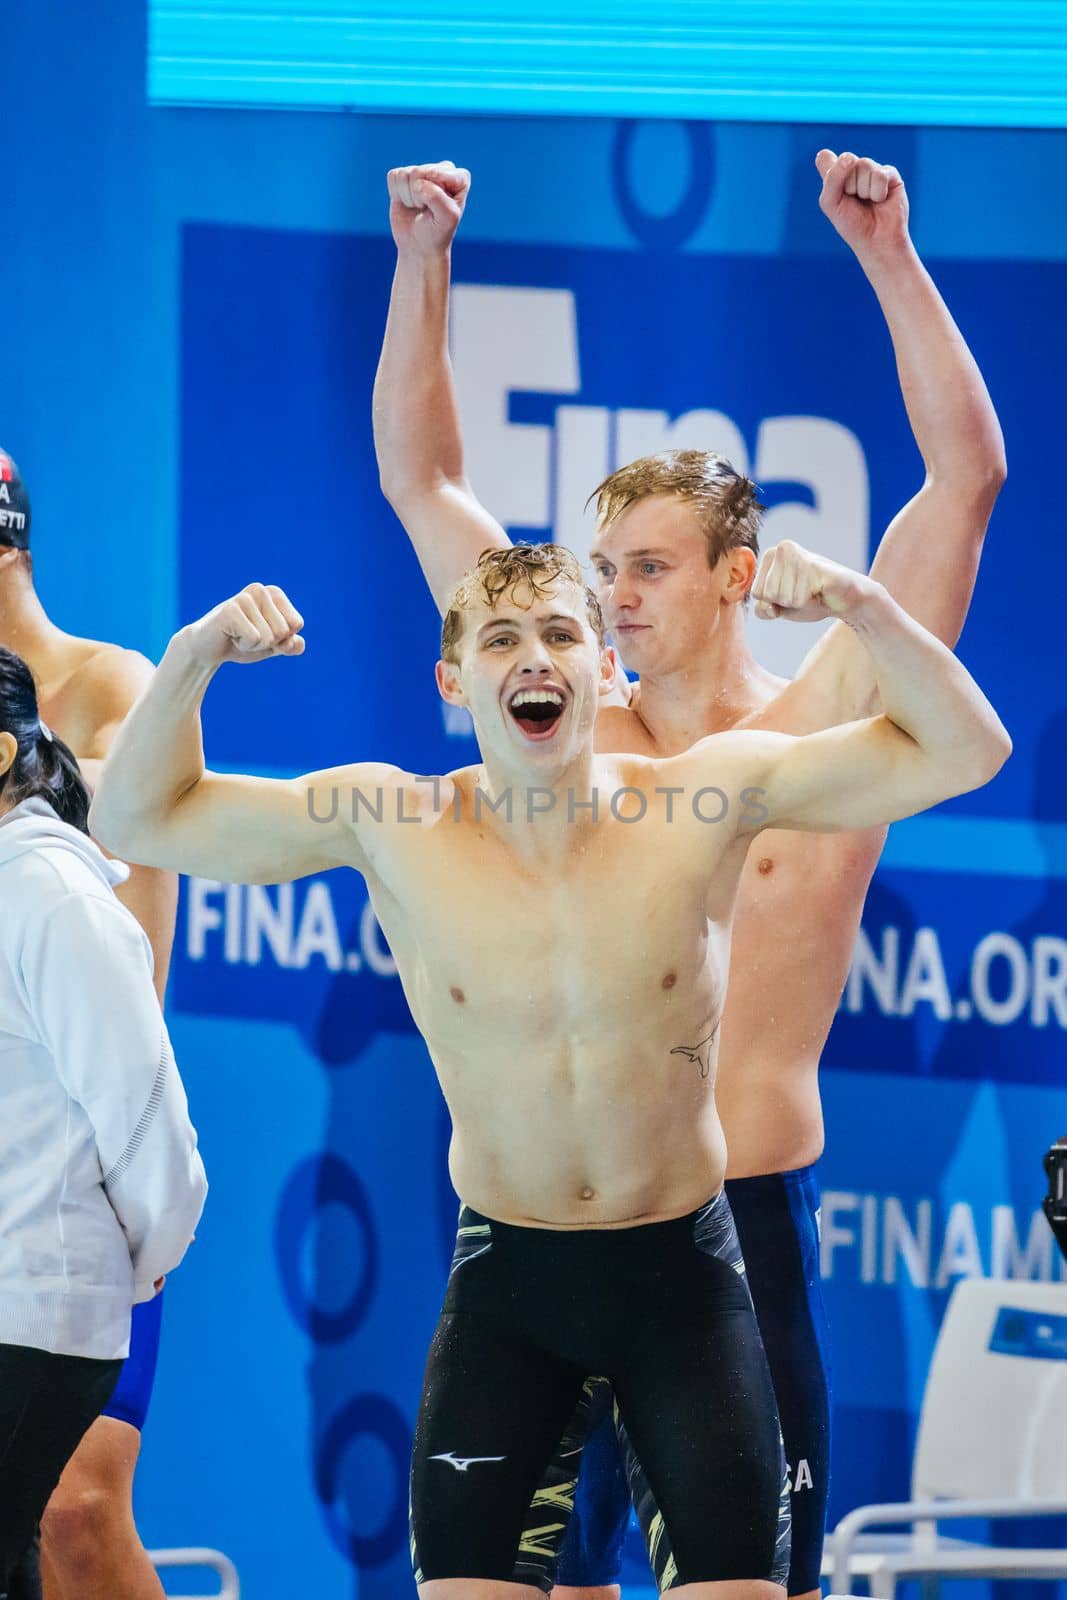 MELBOURNE, AUSTRALIA - DECEMBER 16: Team USA and Carson FOSTER celebrates winning the Men's 4x200m Freestyle final on day four of the 2022 FINA World Short Course Swimming Championships at Melbourne Sports and Aquatic Centre on December 16, 2022 in Melbourne, Australia